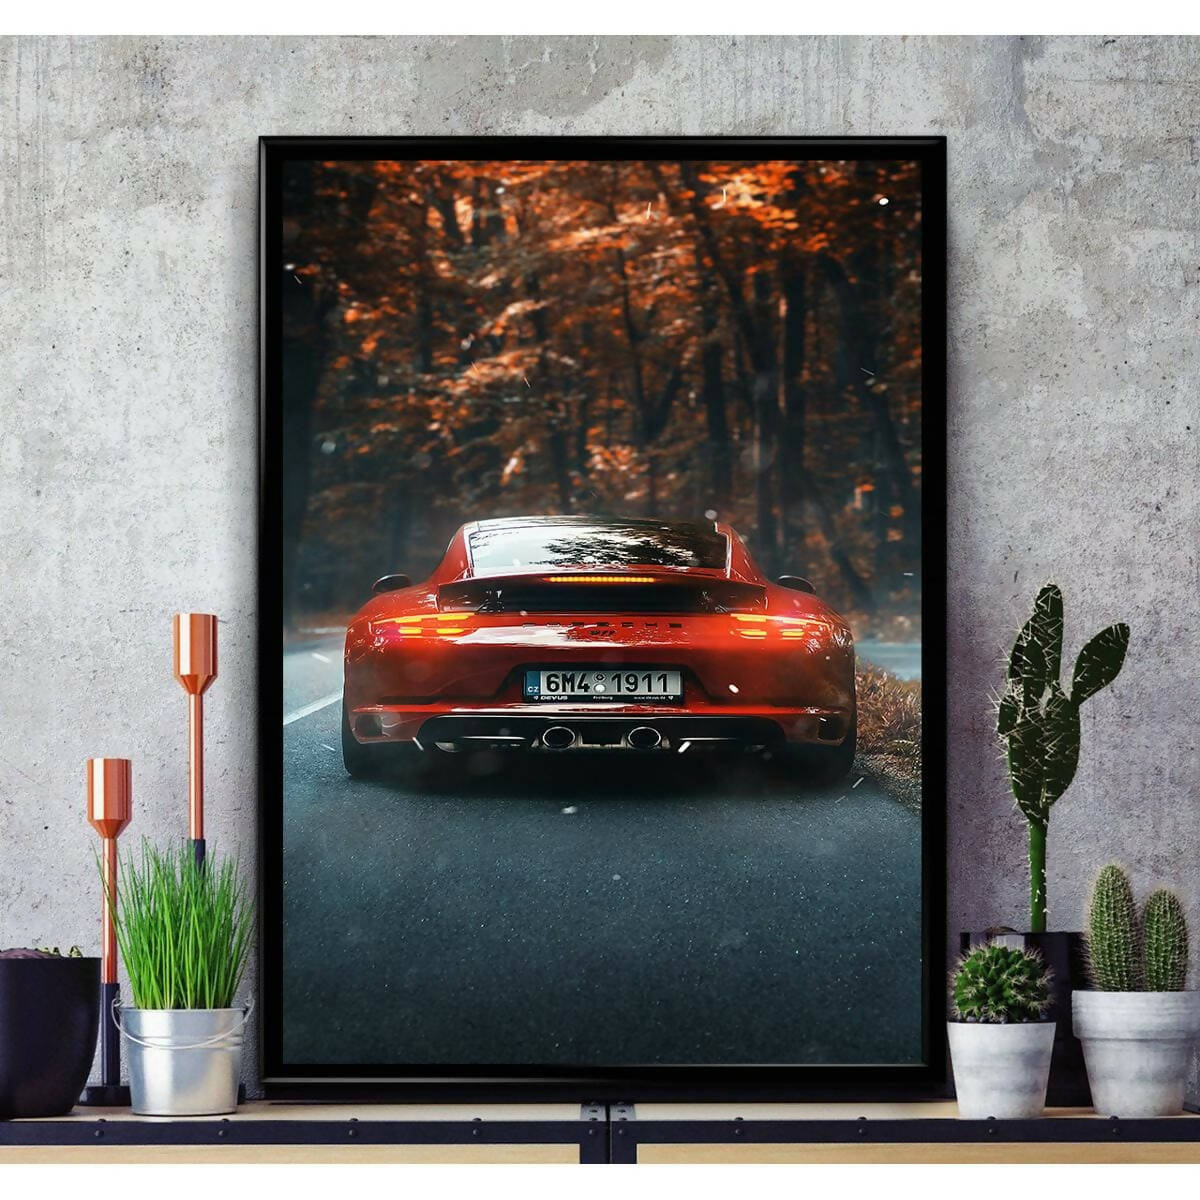 Porsche Car Poster Wall Hanging Glass Photo Frame in Premium Glossy Photo Paper A4 8x12” size for Home Decor and Decoration Accessories